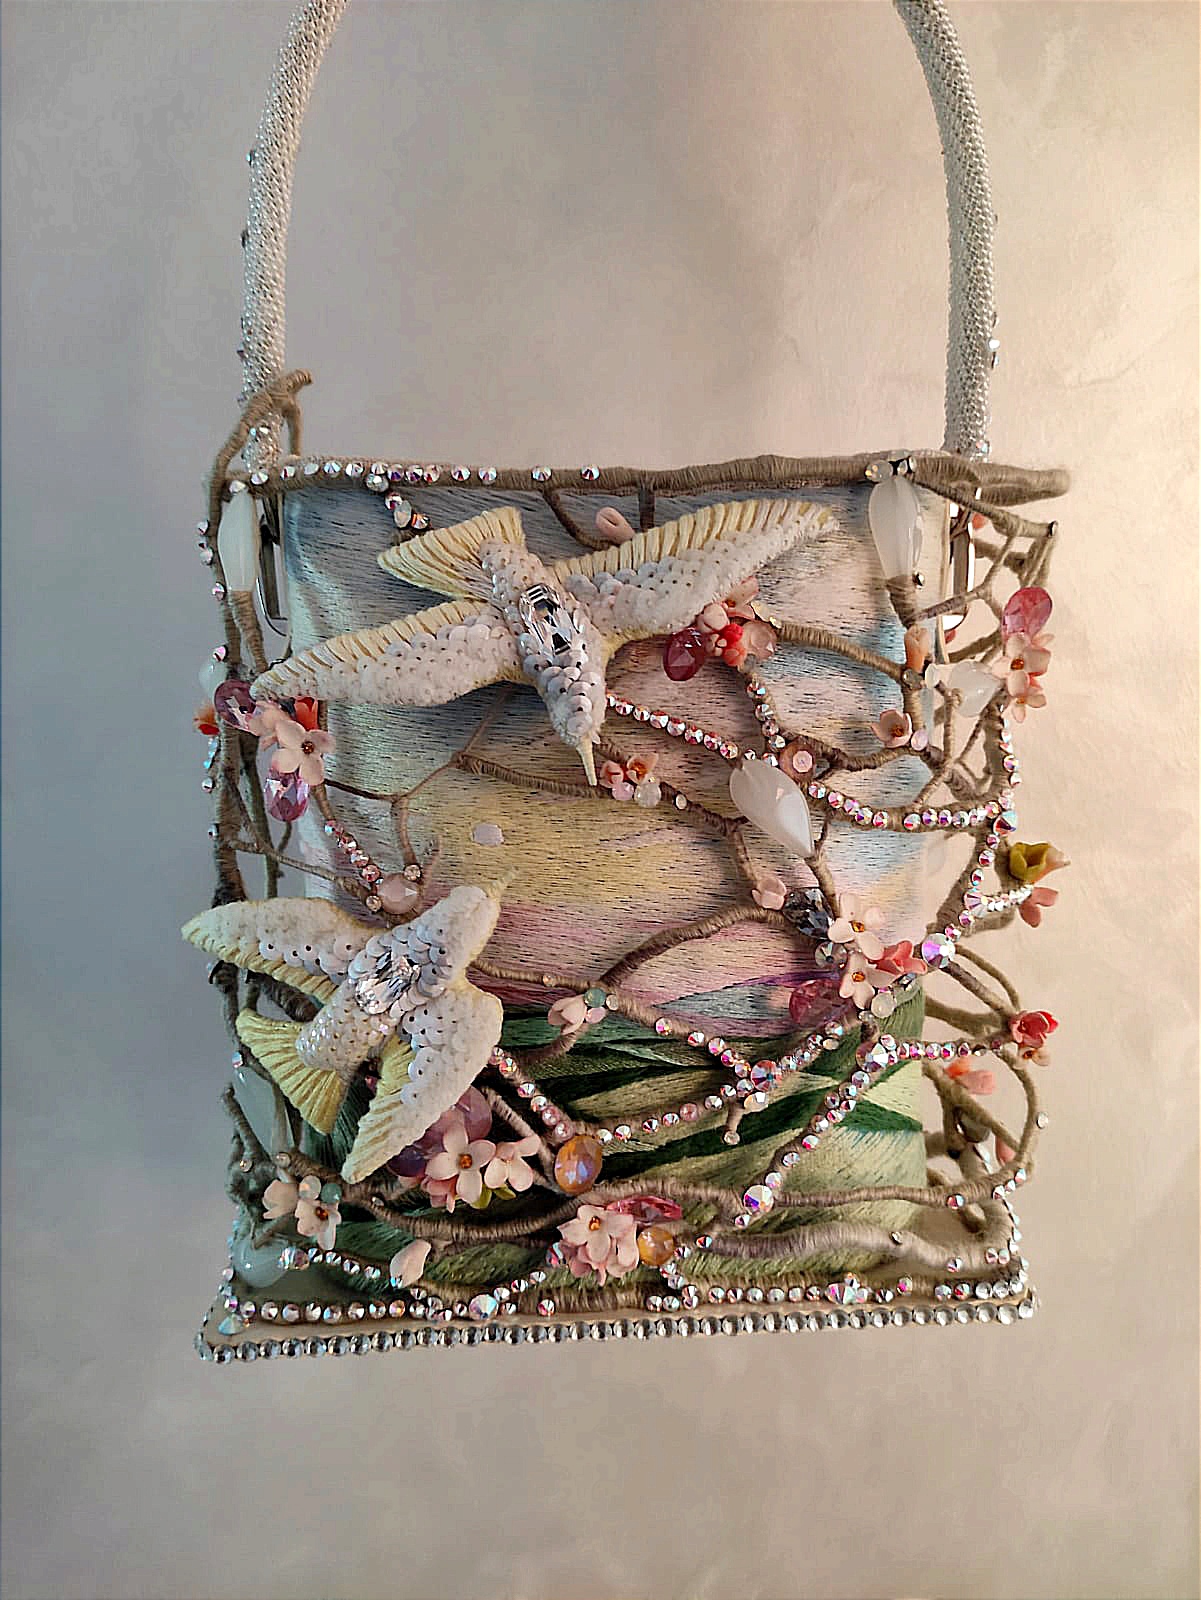 Intricate And Whimsical Hand Embroidered Felted Bags By Alena Kova (24)